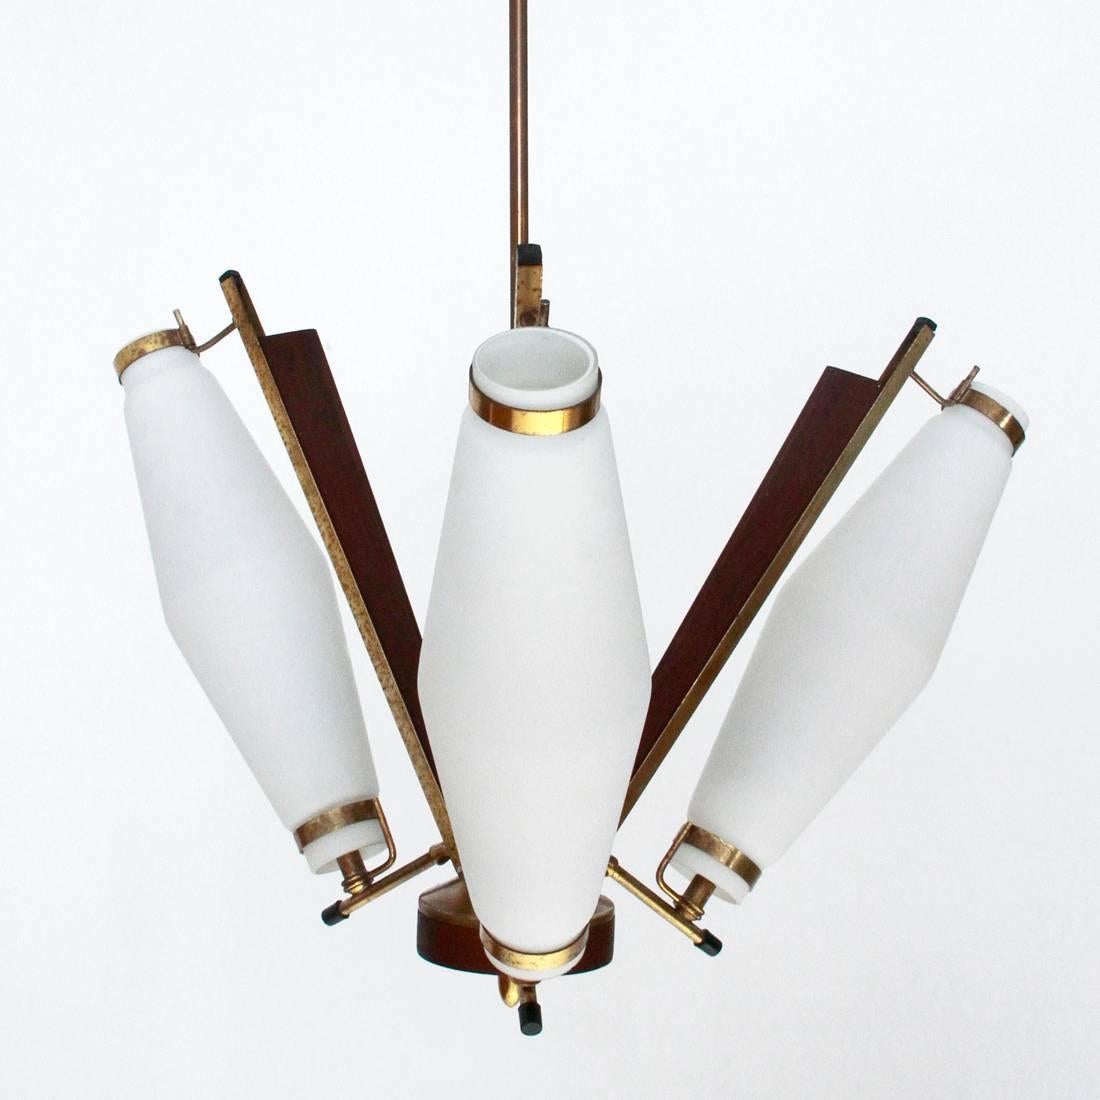 Italian ceiling lamp produced in the 1950s.
Black painted metal structure with brass and wood inserts.
Three white opal glass diffusers.
Good general conditions, some signs due to normal use over time.

Dimensions: Diameter 60 cm, height 126